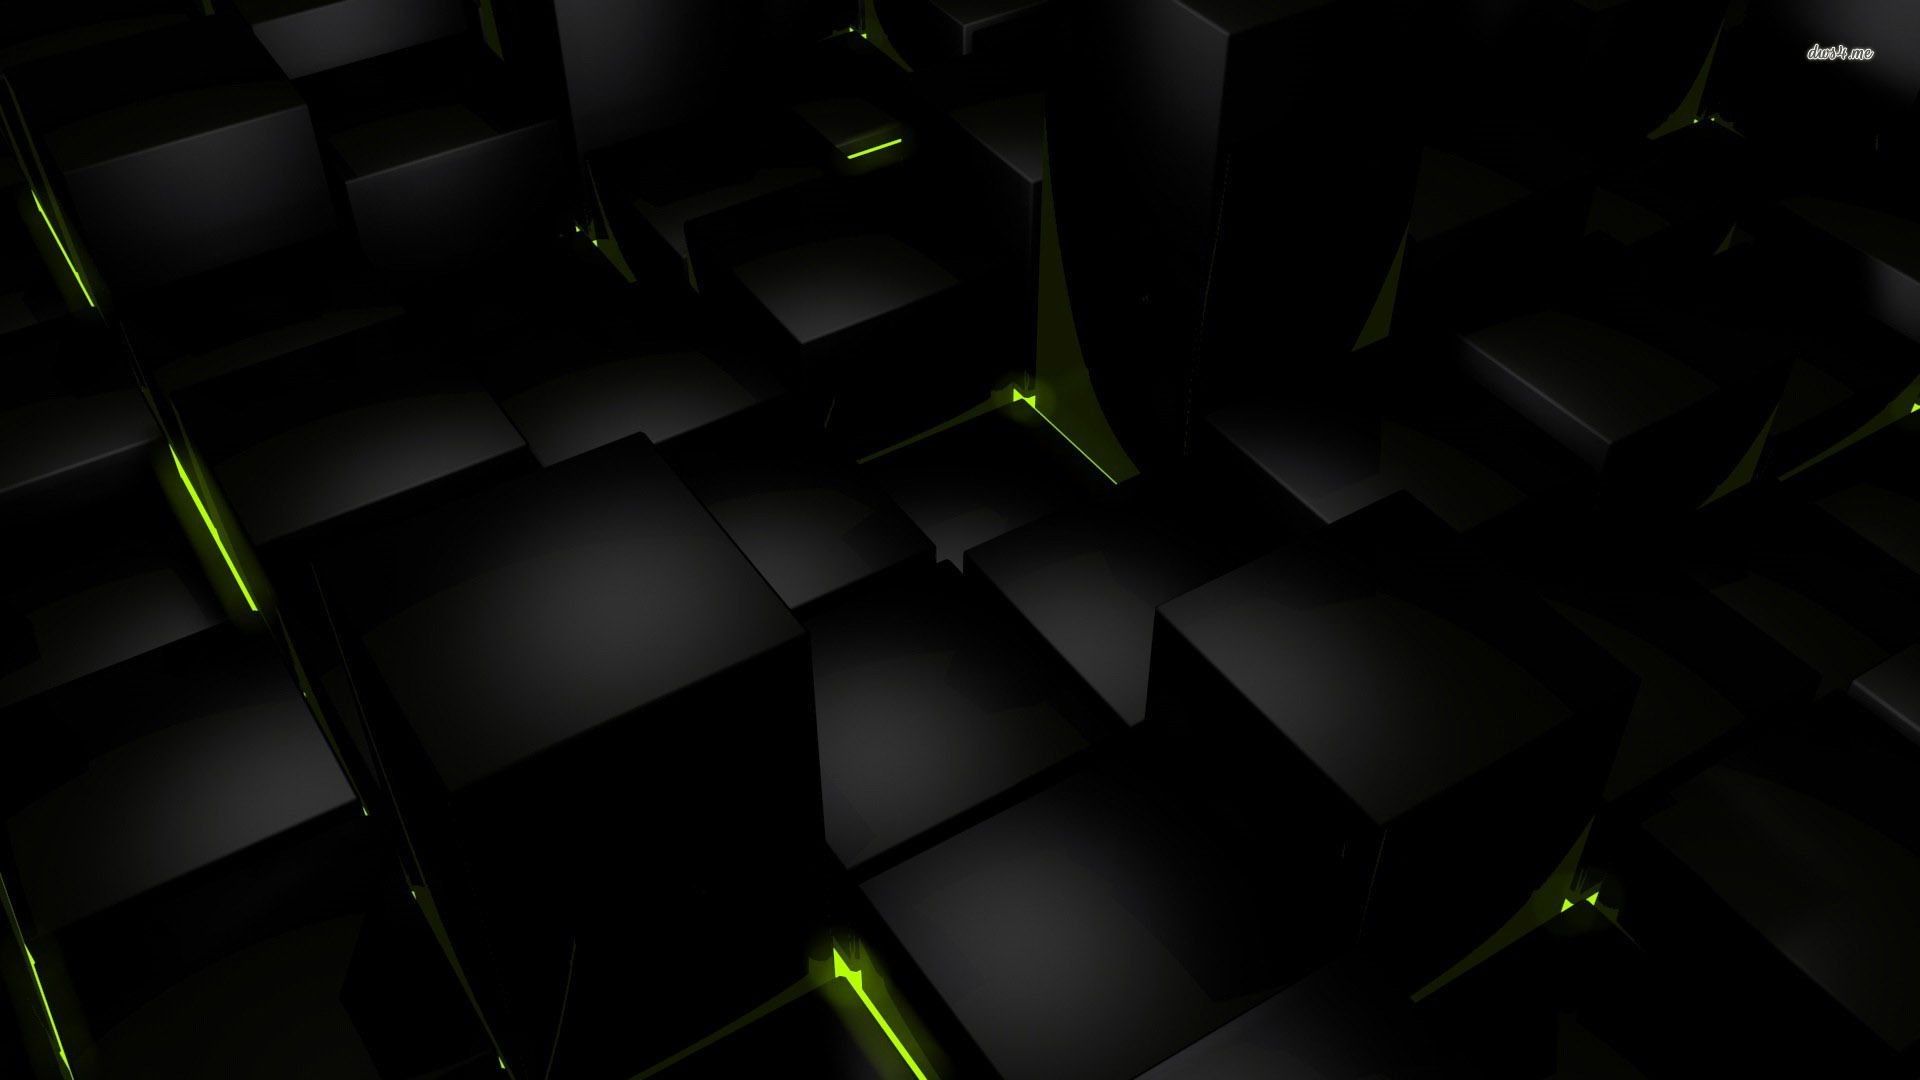 free cool Black Green Shards chrome extension HD wallpaper theme tab for chrome browser!